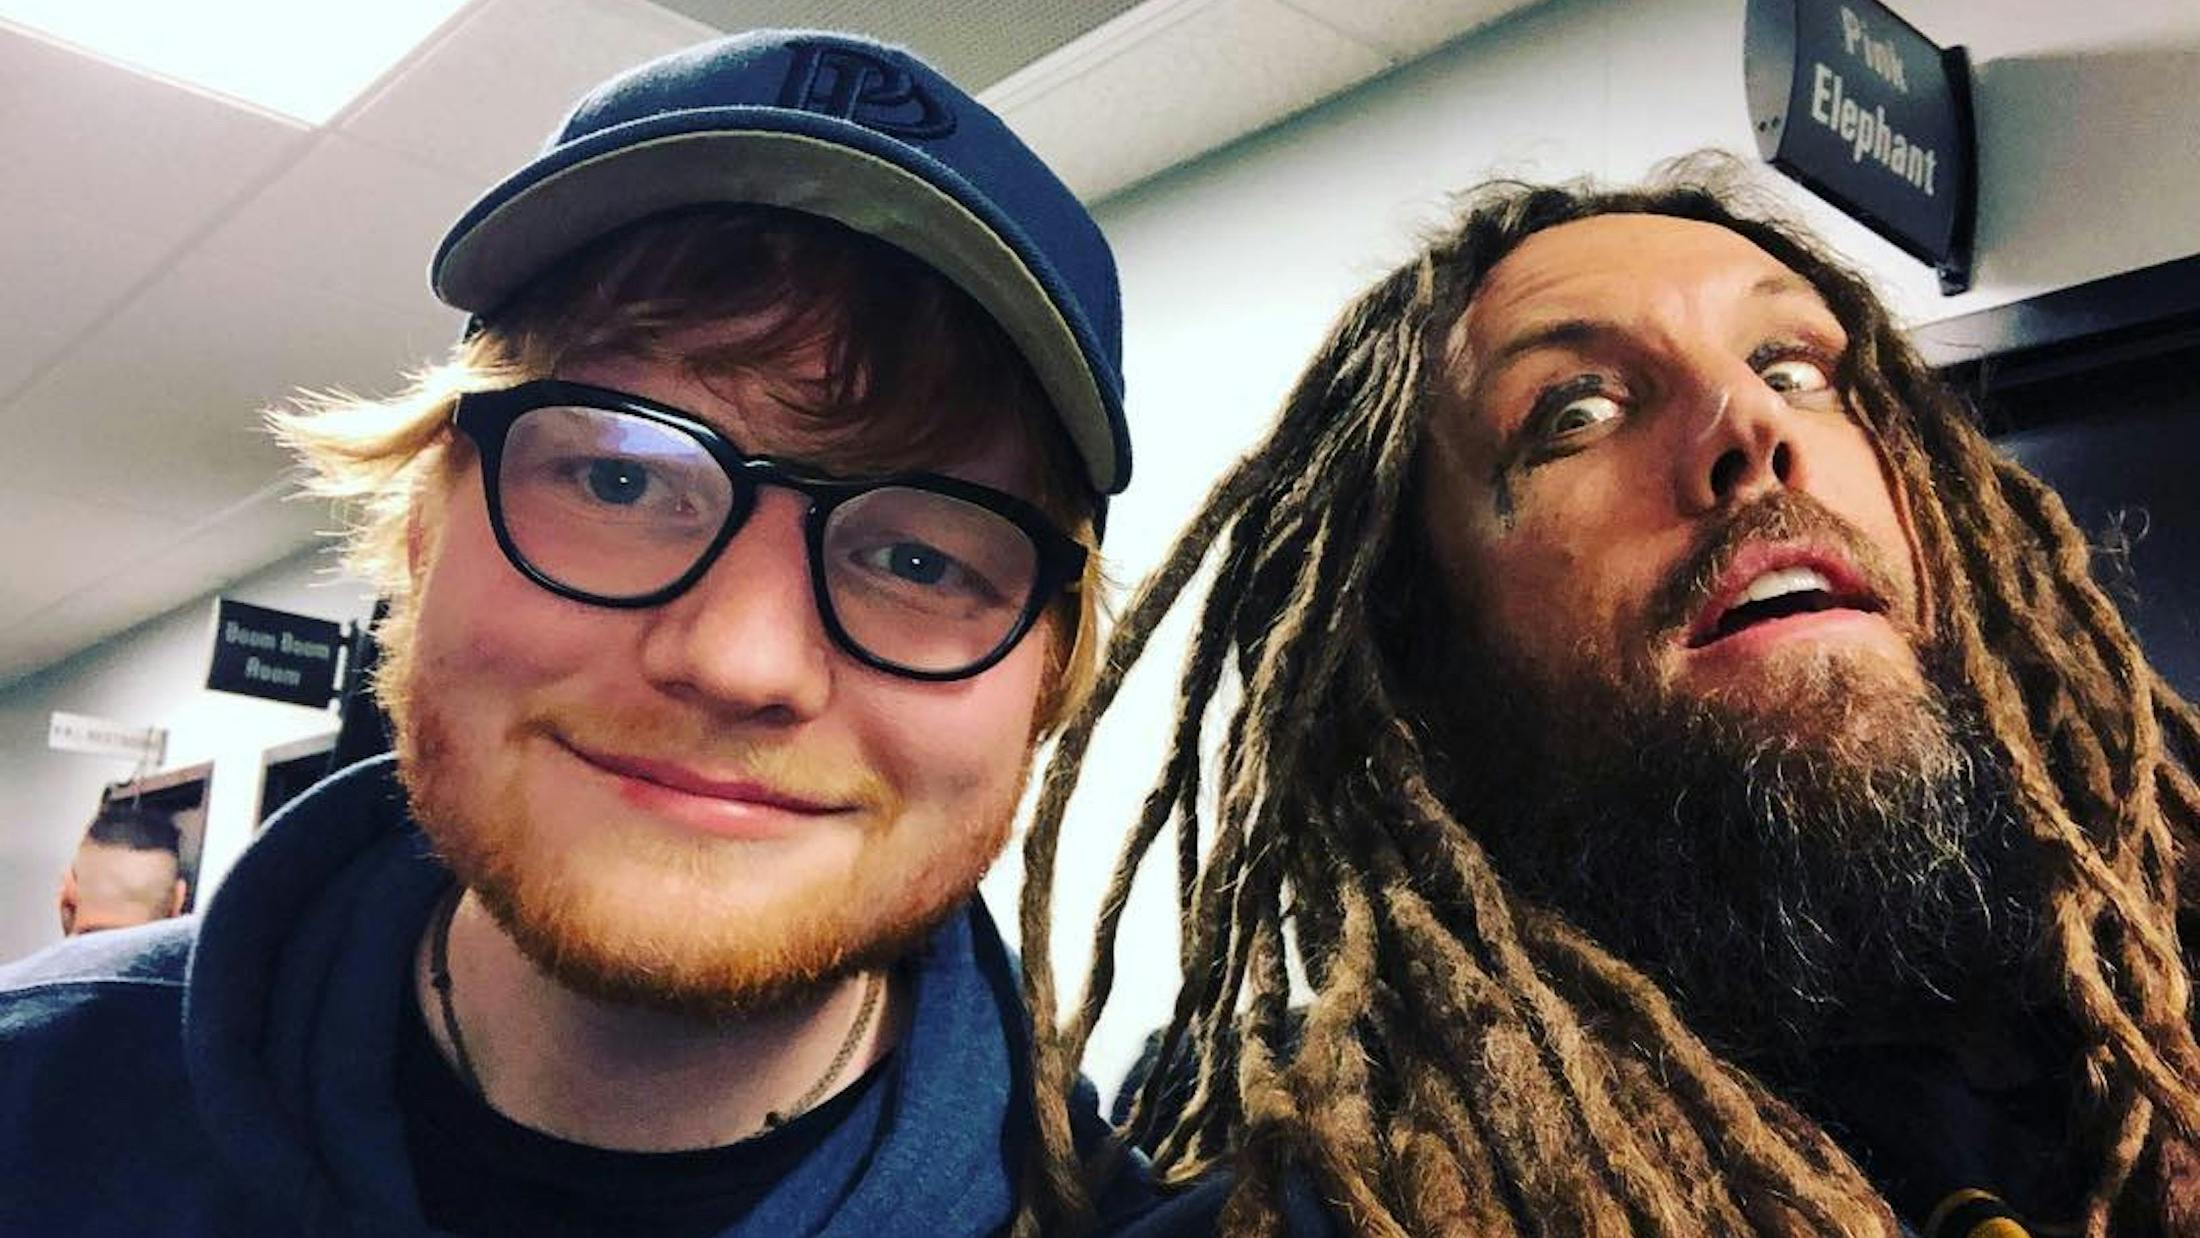 Here's A Photo Of Ed Sheeran Hanging Out With Korn's Head